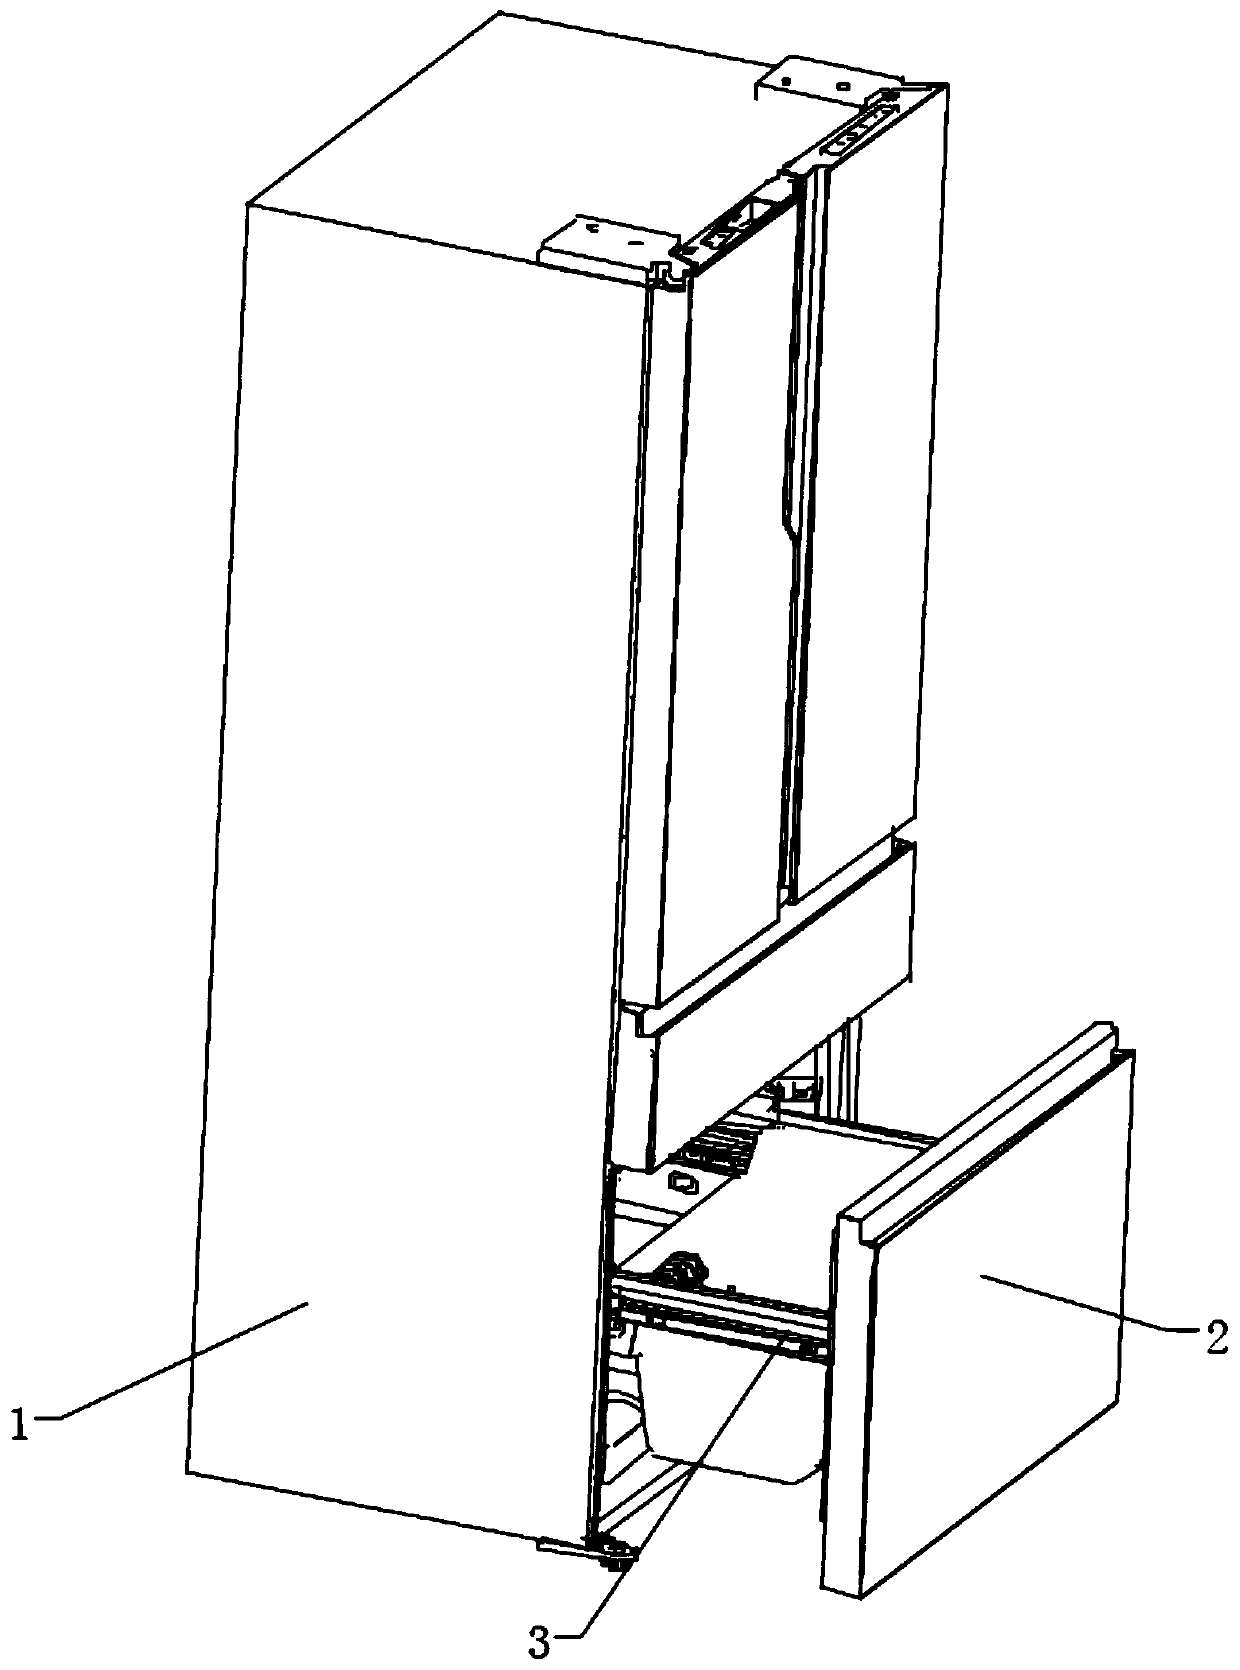 Refrigerator capable of automatically opening and closing door